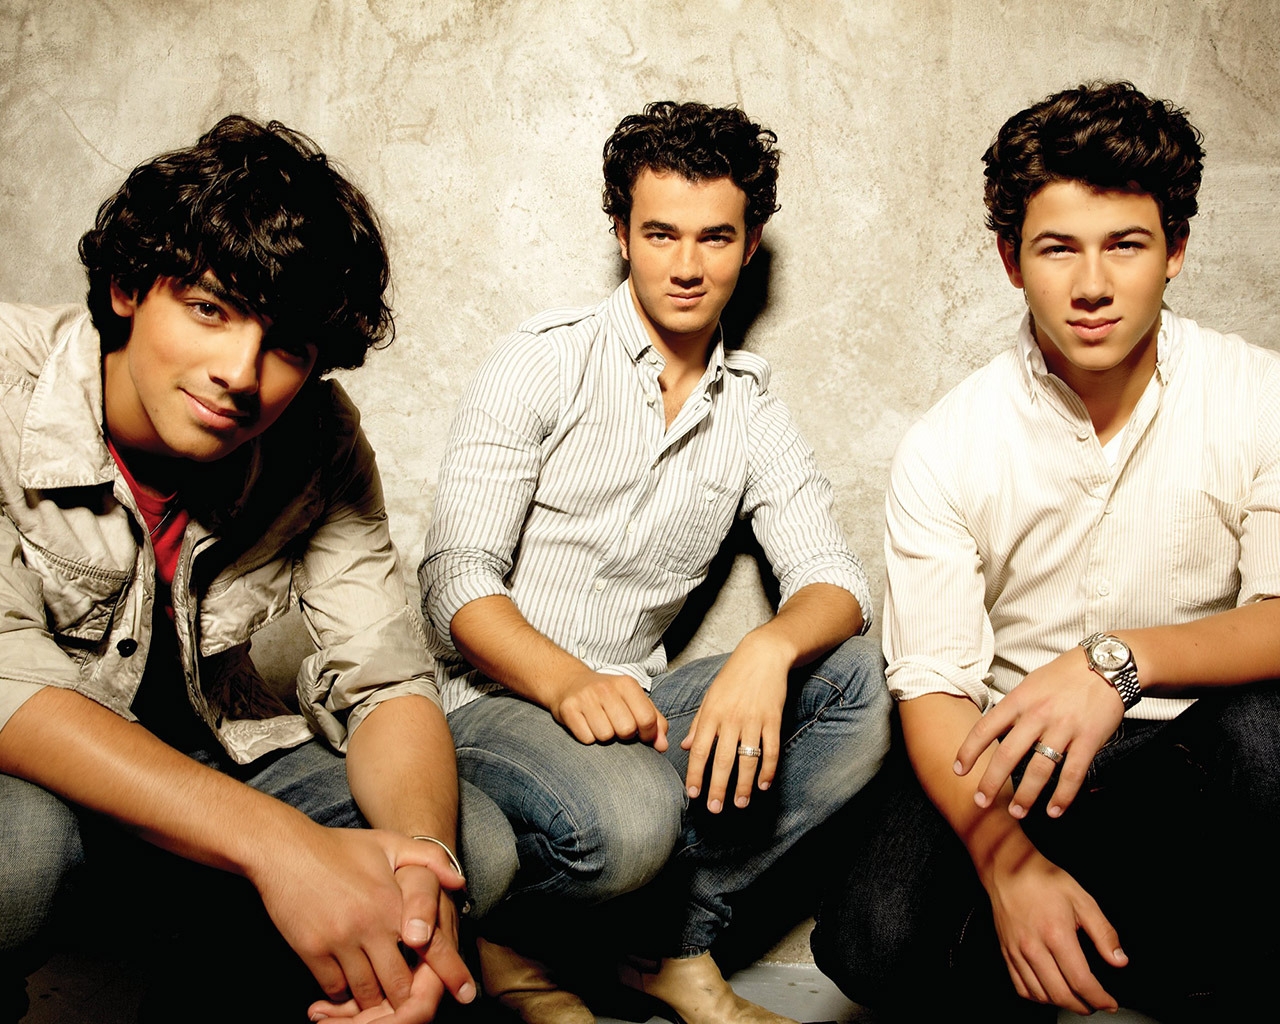 Cool Jonas Brothers for 1280 x 1024 resolution